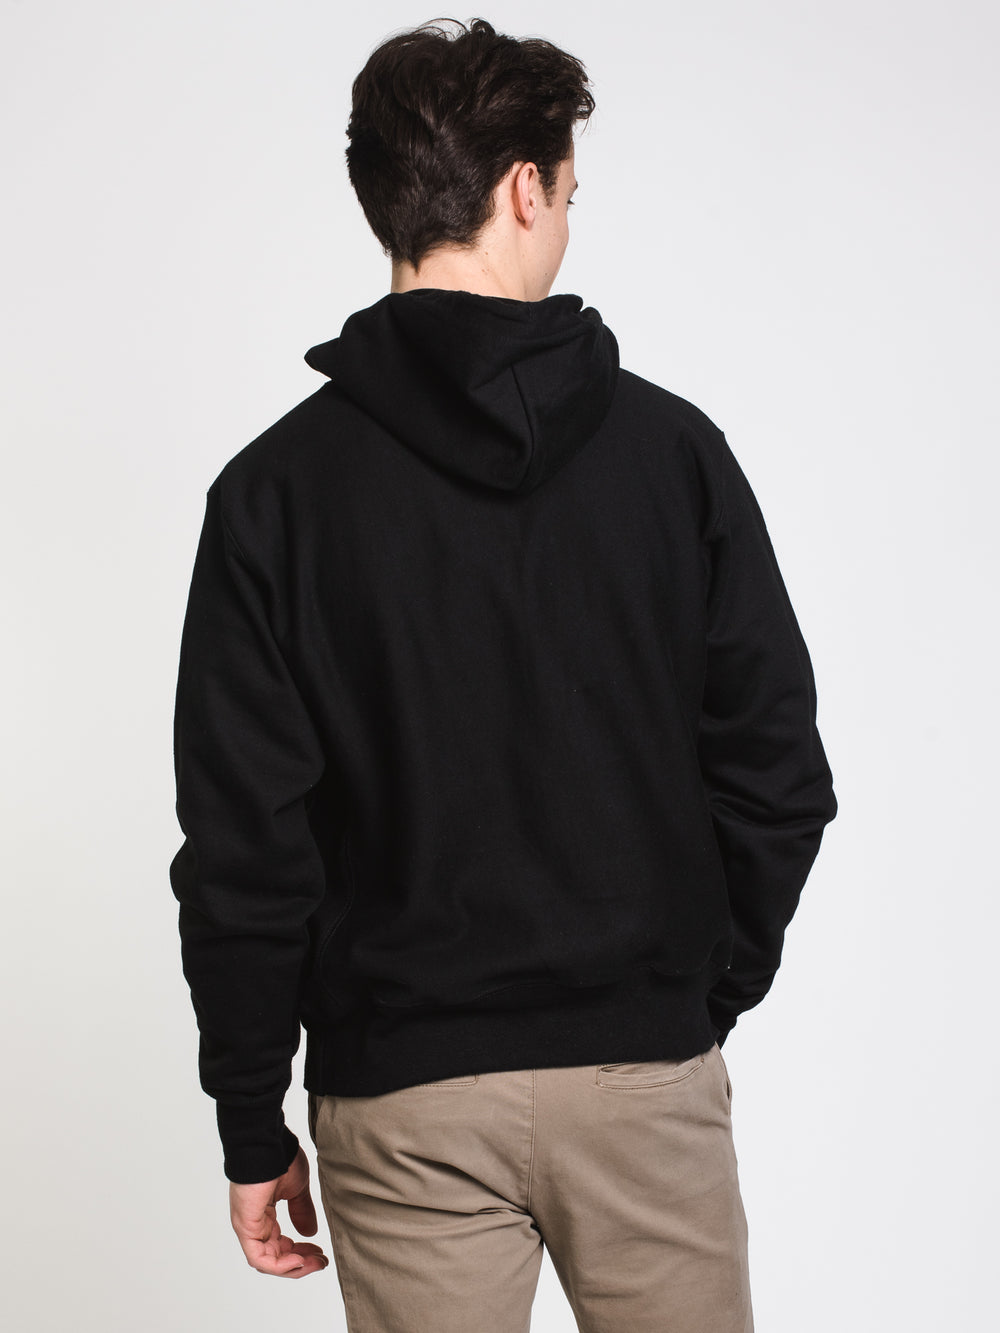 MENS RW EMBROIDERED SCRIPT PULLOVER HOODIE - BLACK - CLEARANCE